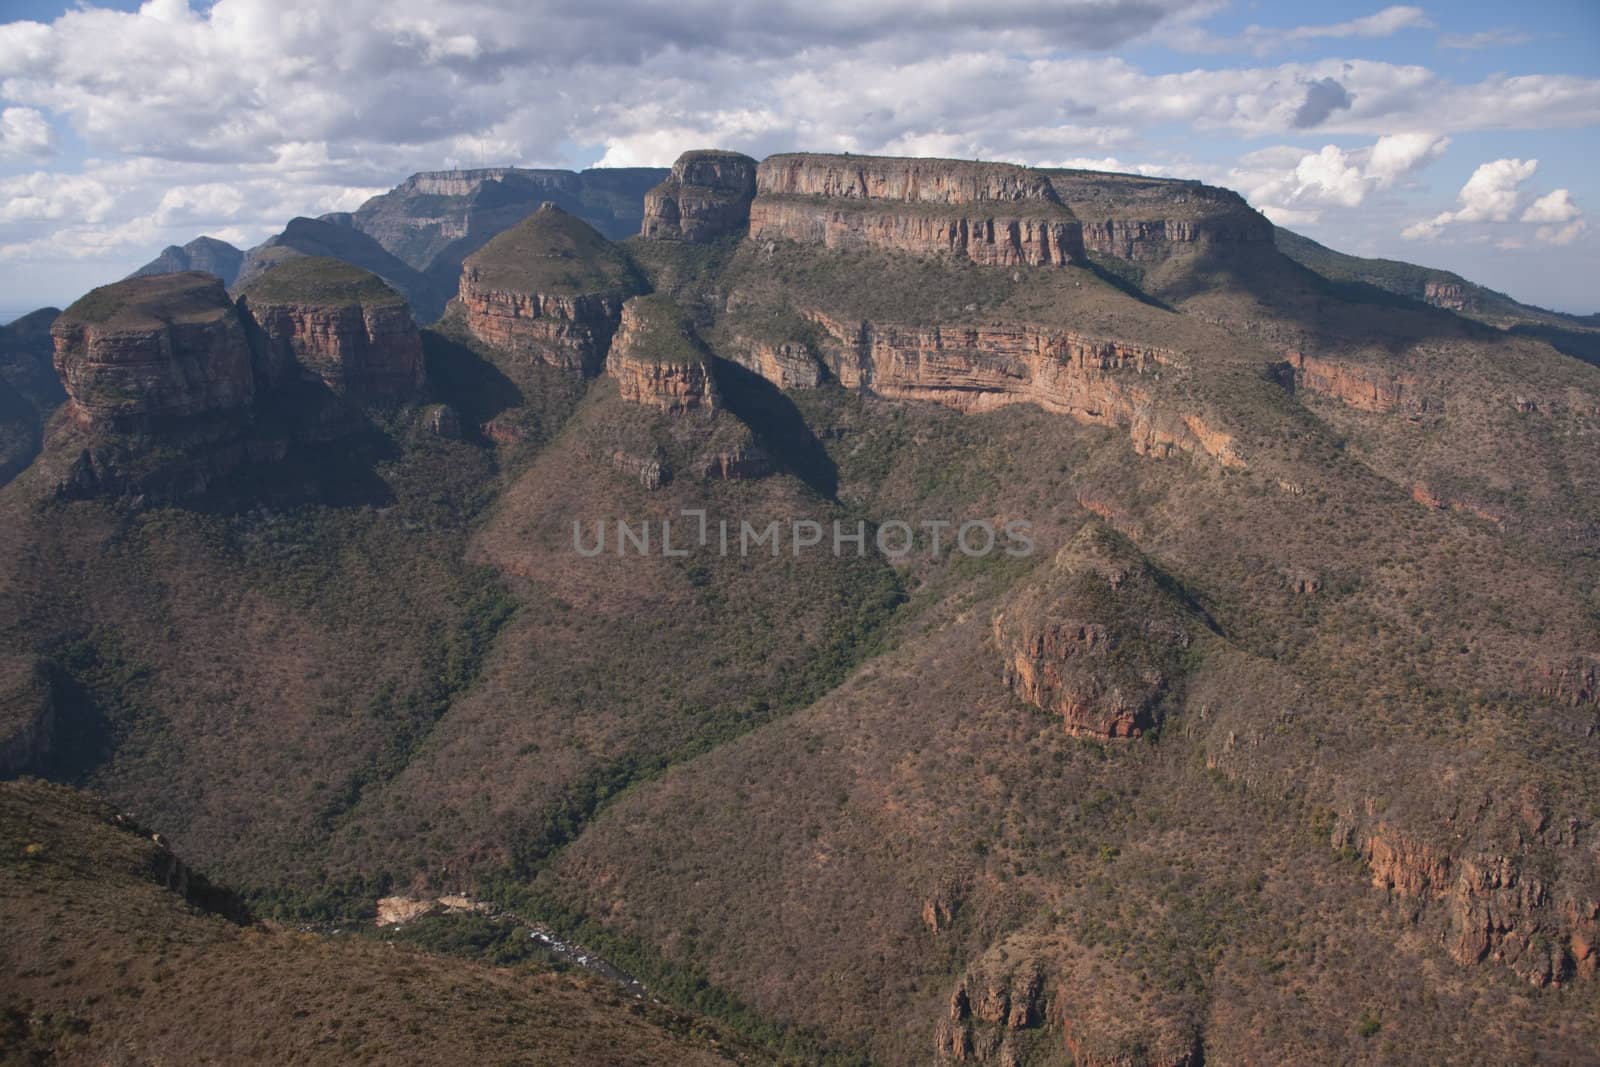 The Three Rondavels on an escarpment in the Blyde River Canyon Nature Reserve in Mpumalanga, South Africa